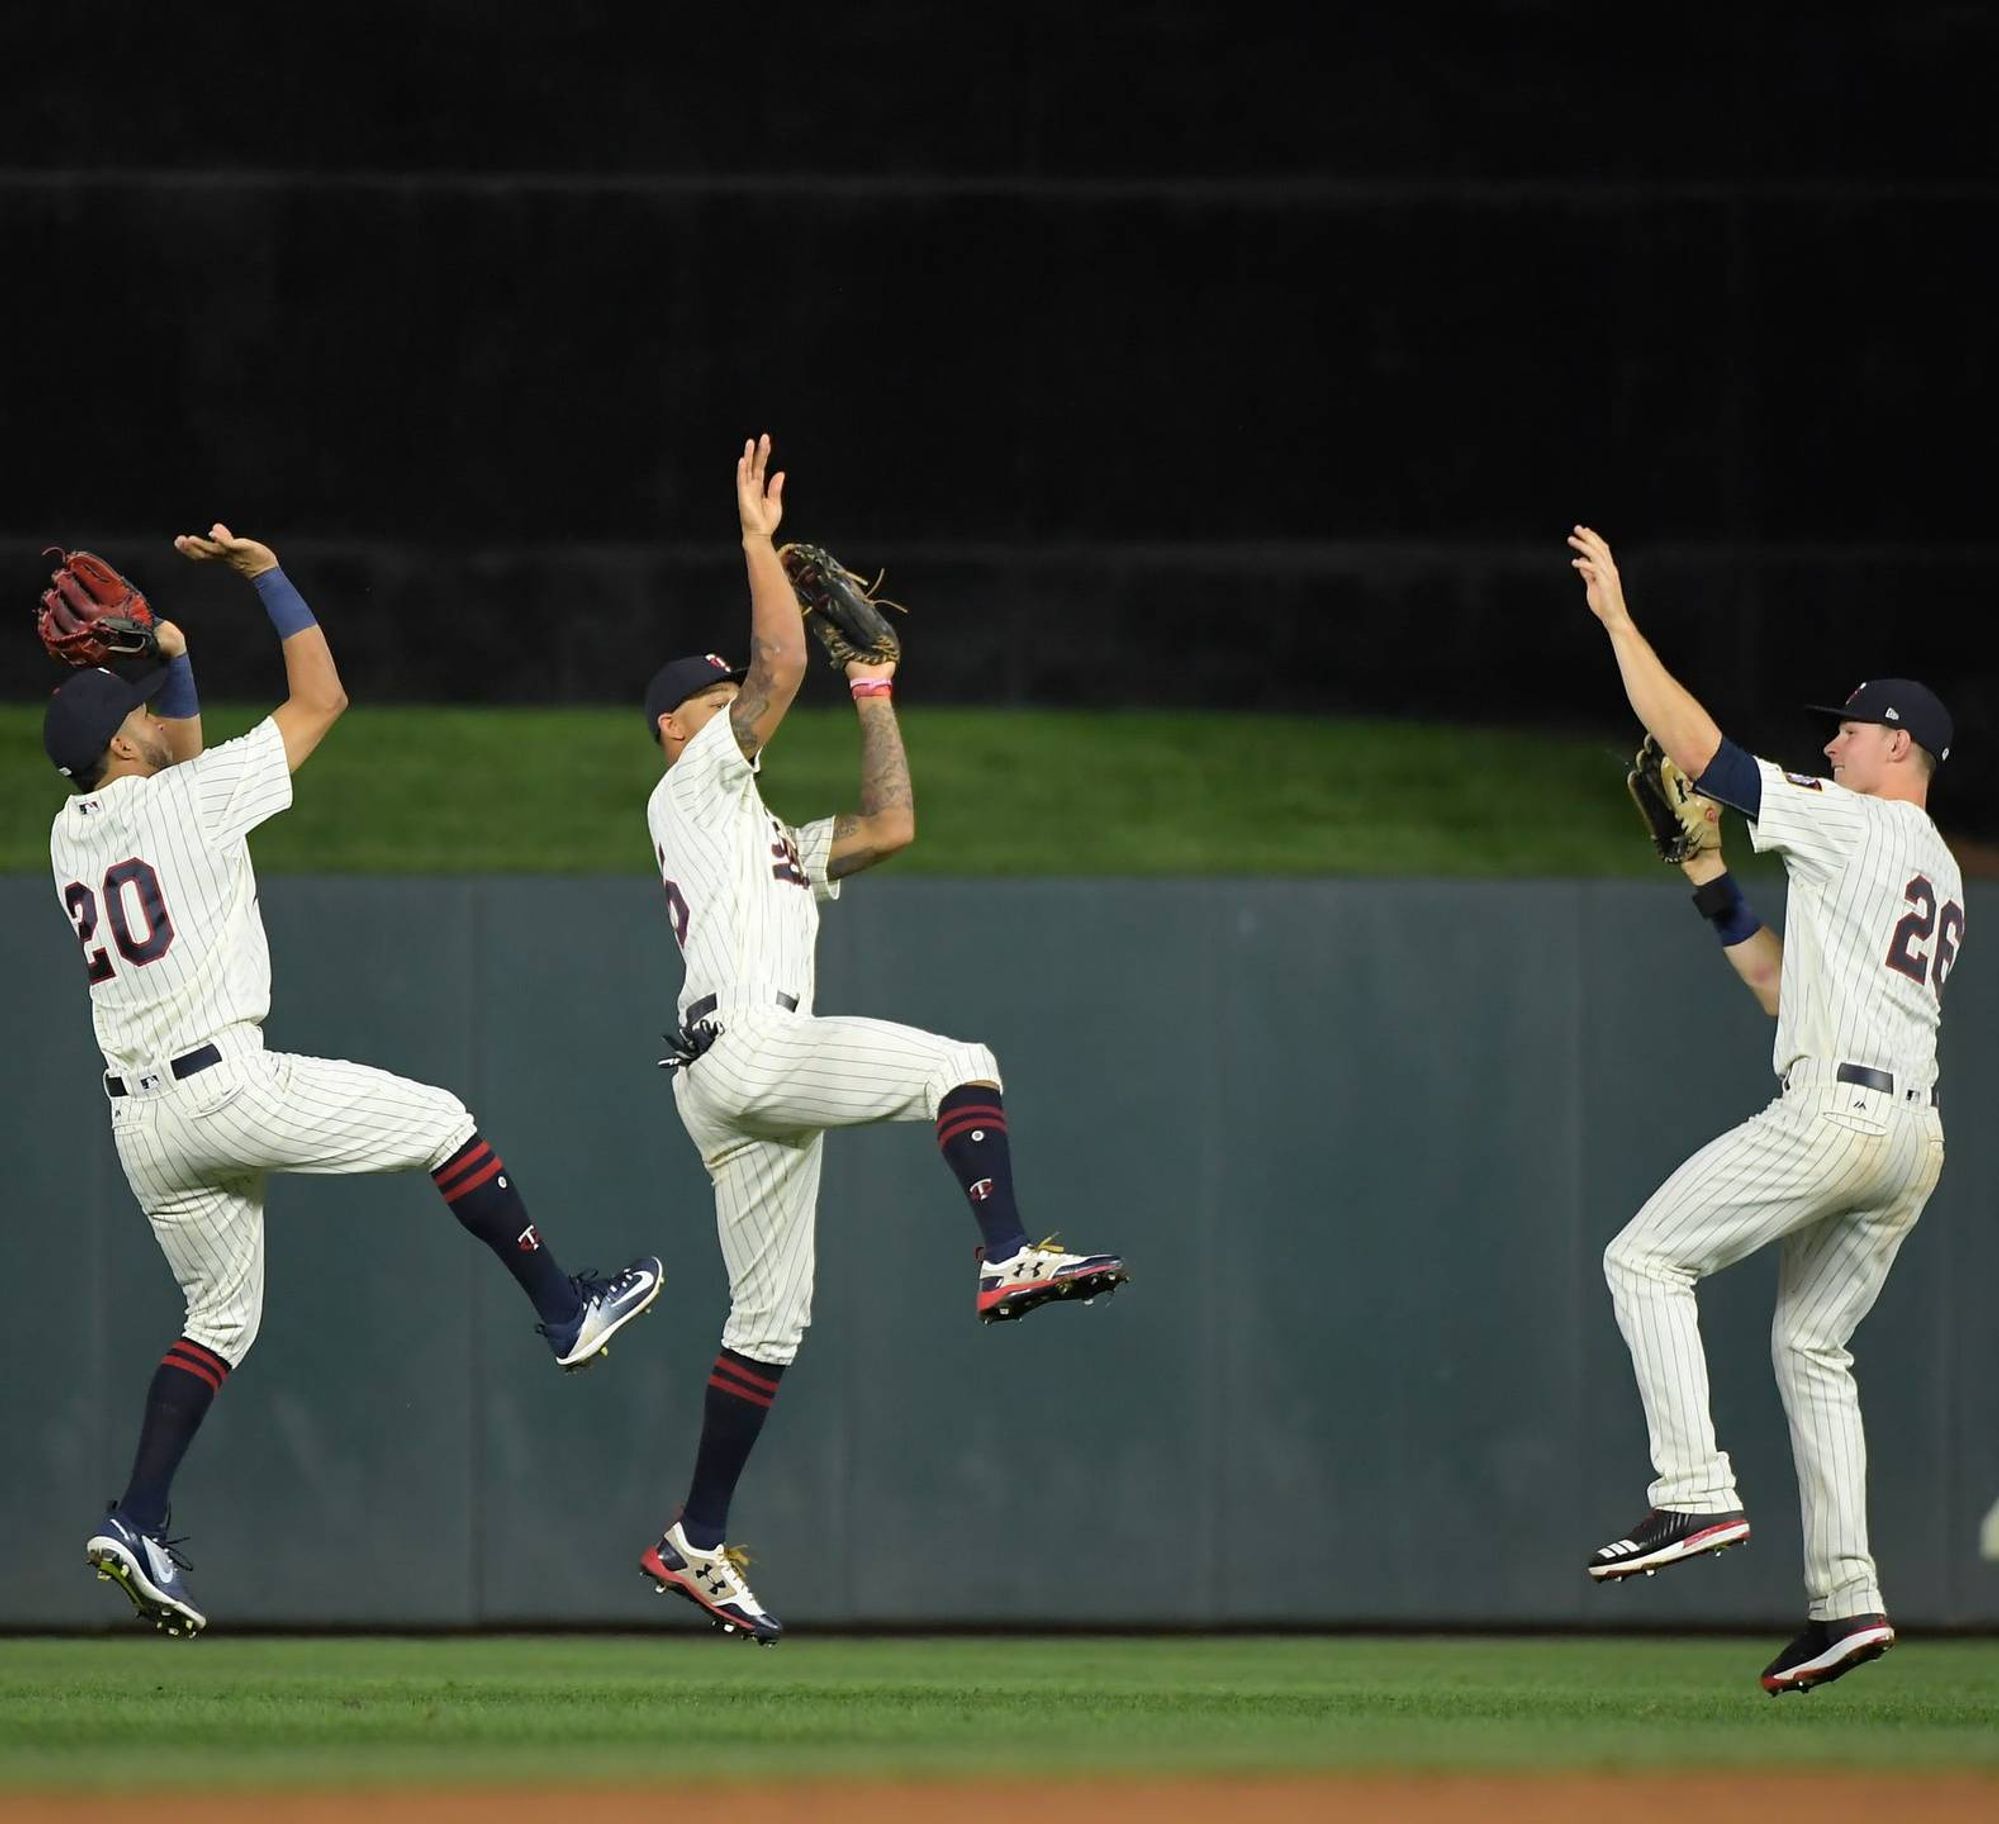 Twins outfielders celebrating a win. Photo courtesy of the Star Tribune.